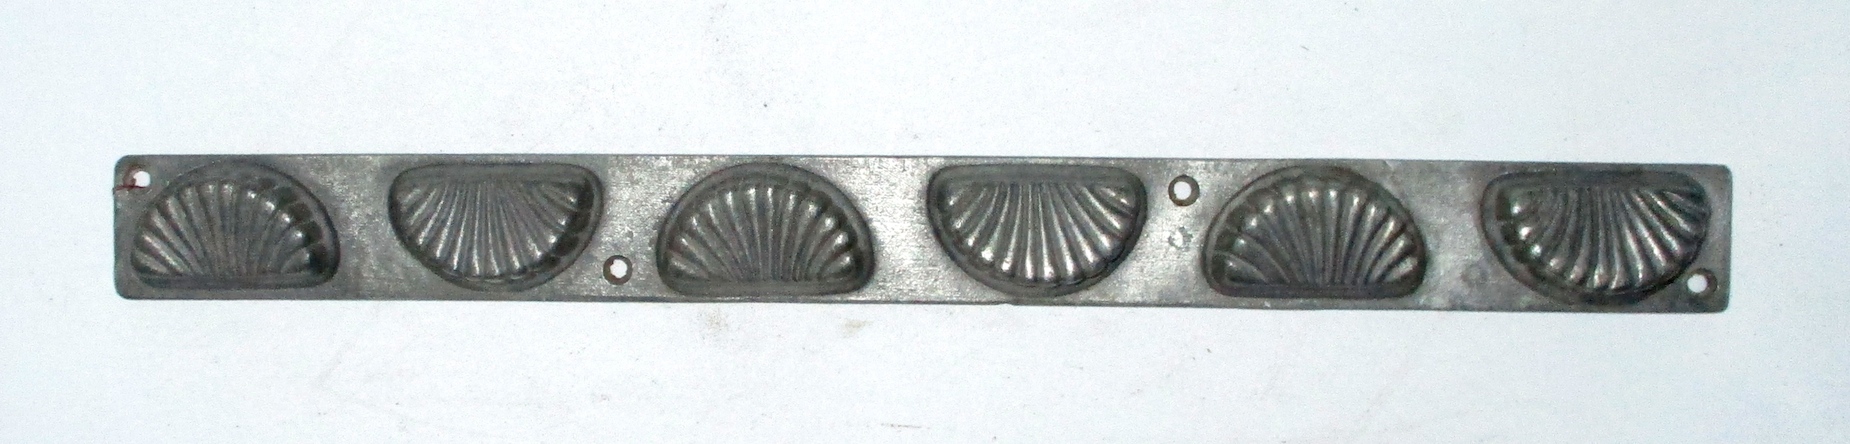 Pewter Food Mold (14" x 1 1/4" x 1/2"